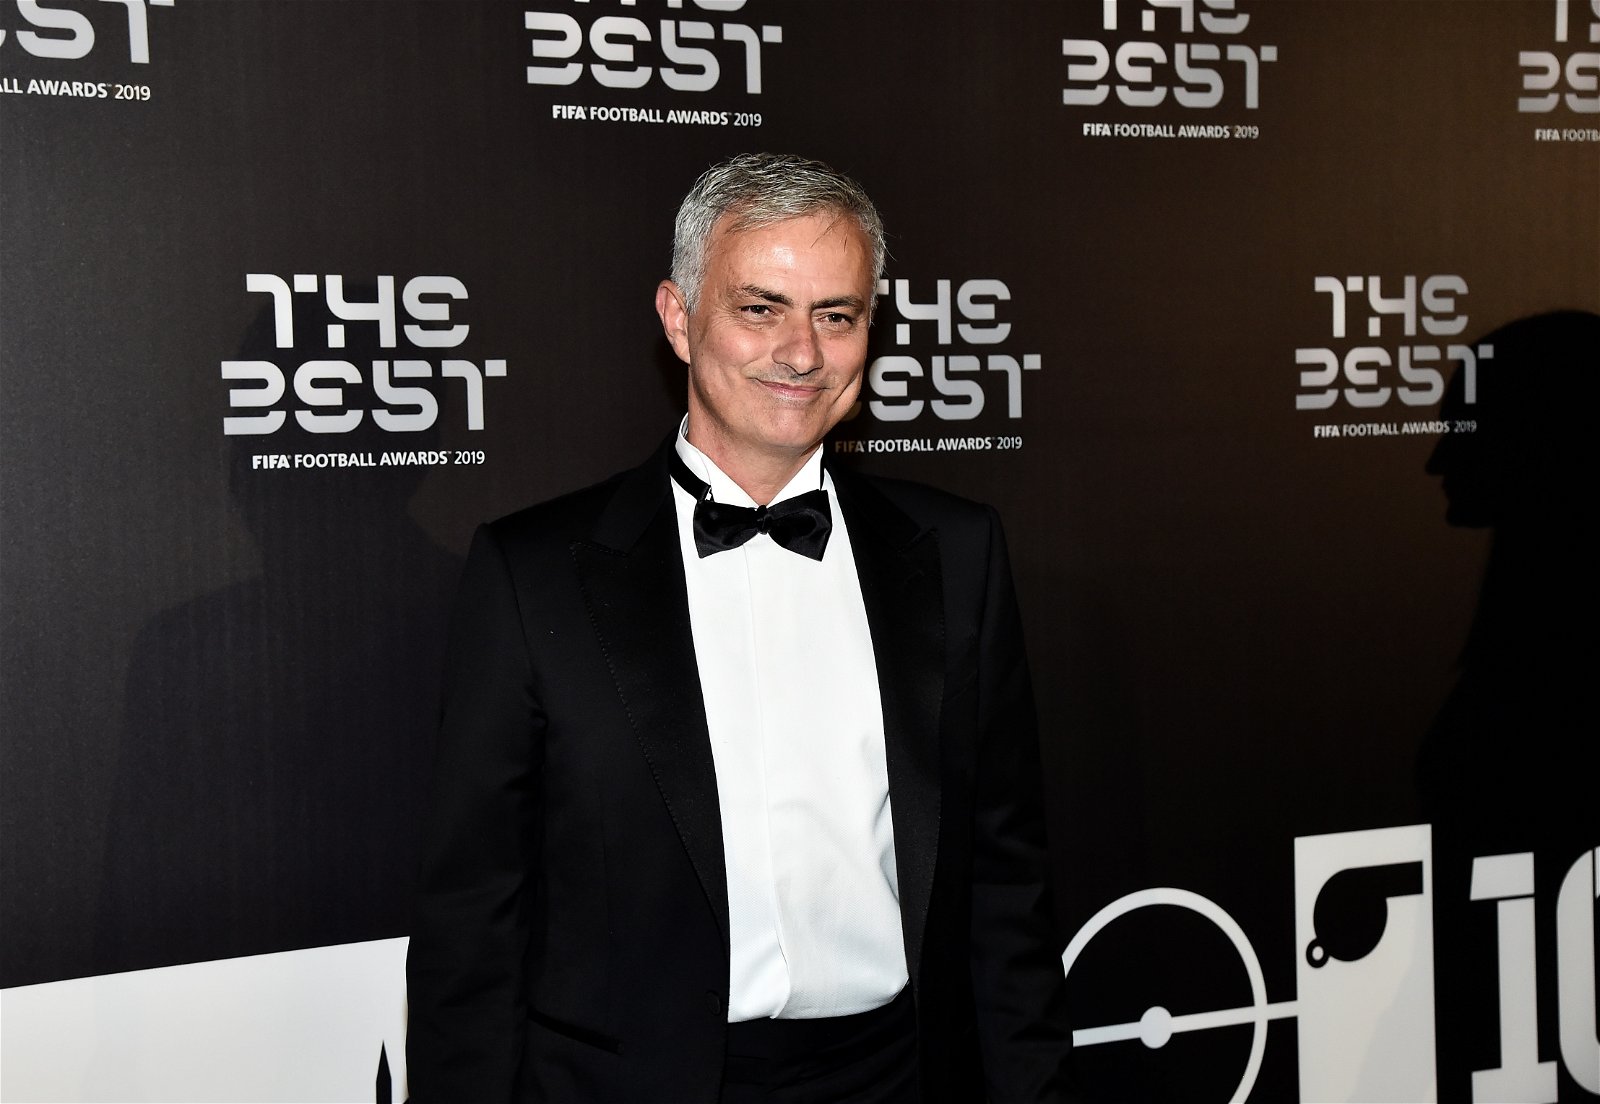 Jose Mourinho in talks with former club Real Madrid to take up manager role